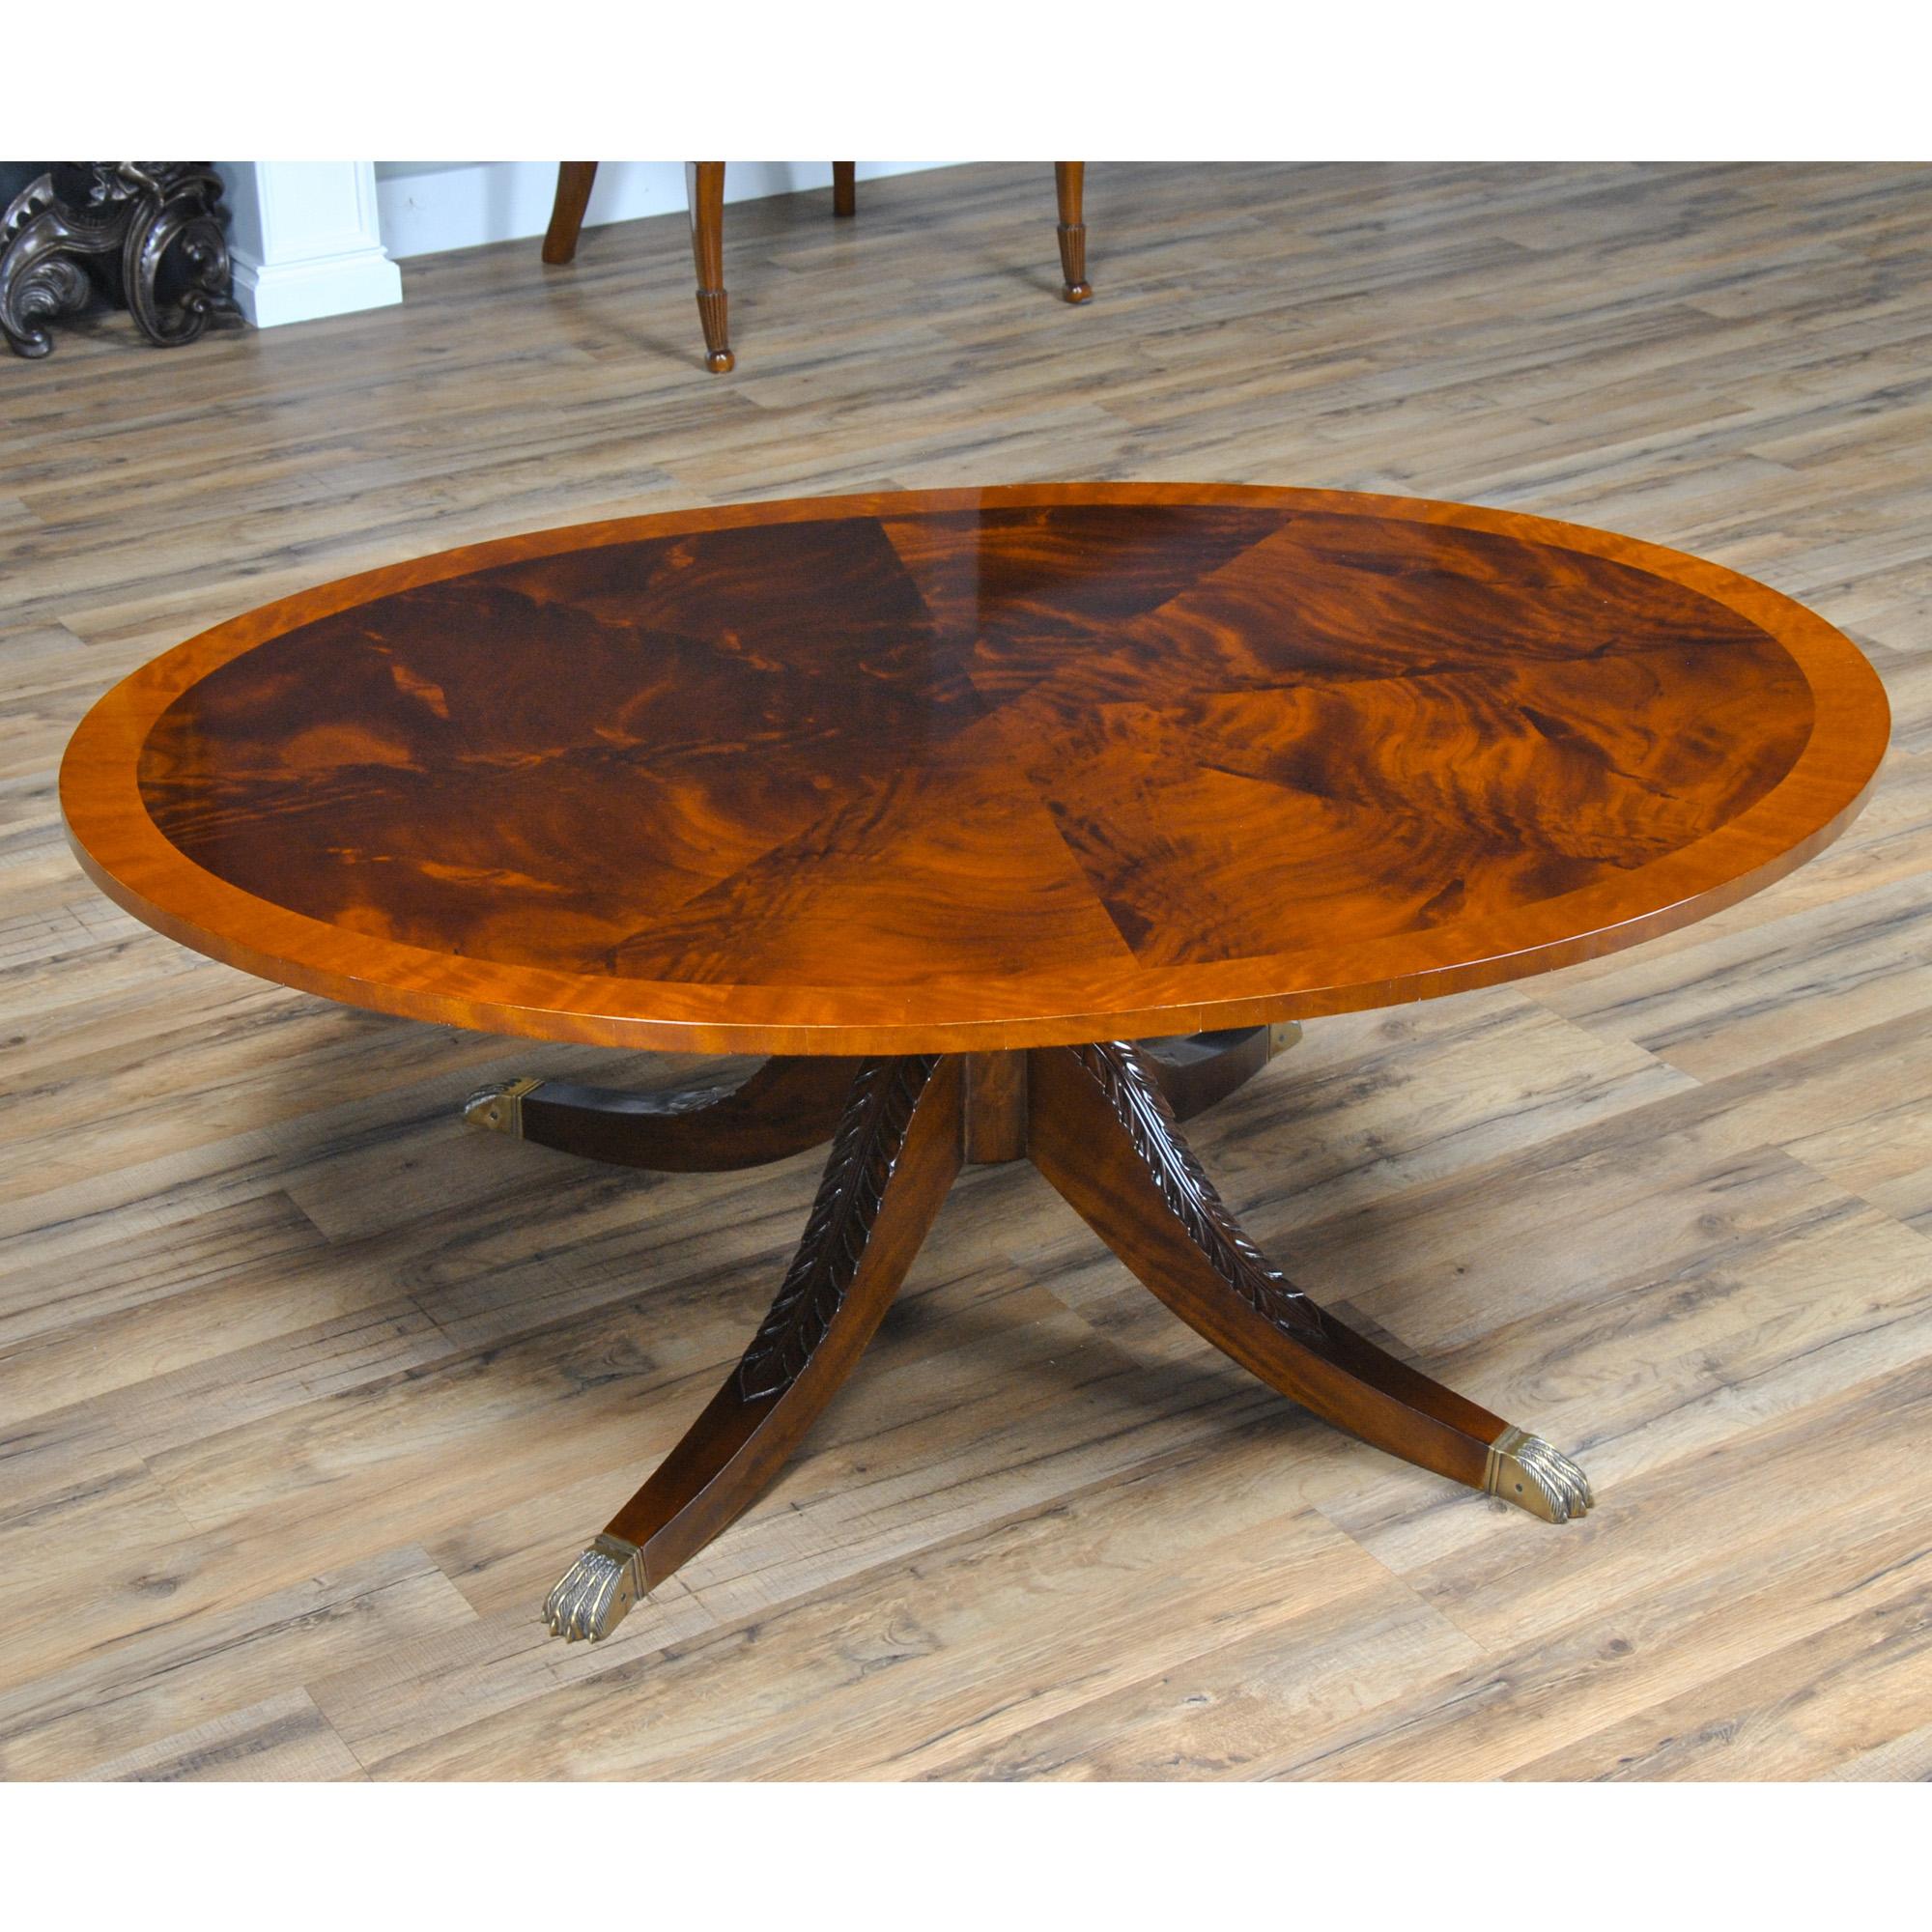 An Oval Cocktail Table of the highest quality, produced by Niagara Furniture. Satinwood banding surrounds a field of pie shaped, figured mahogany to form an elegant and elliptical top. The oval shaped top allows for ease of movement around the table